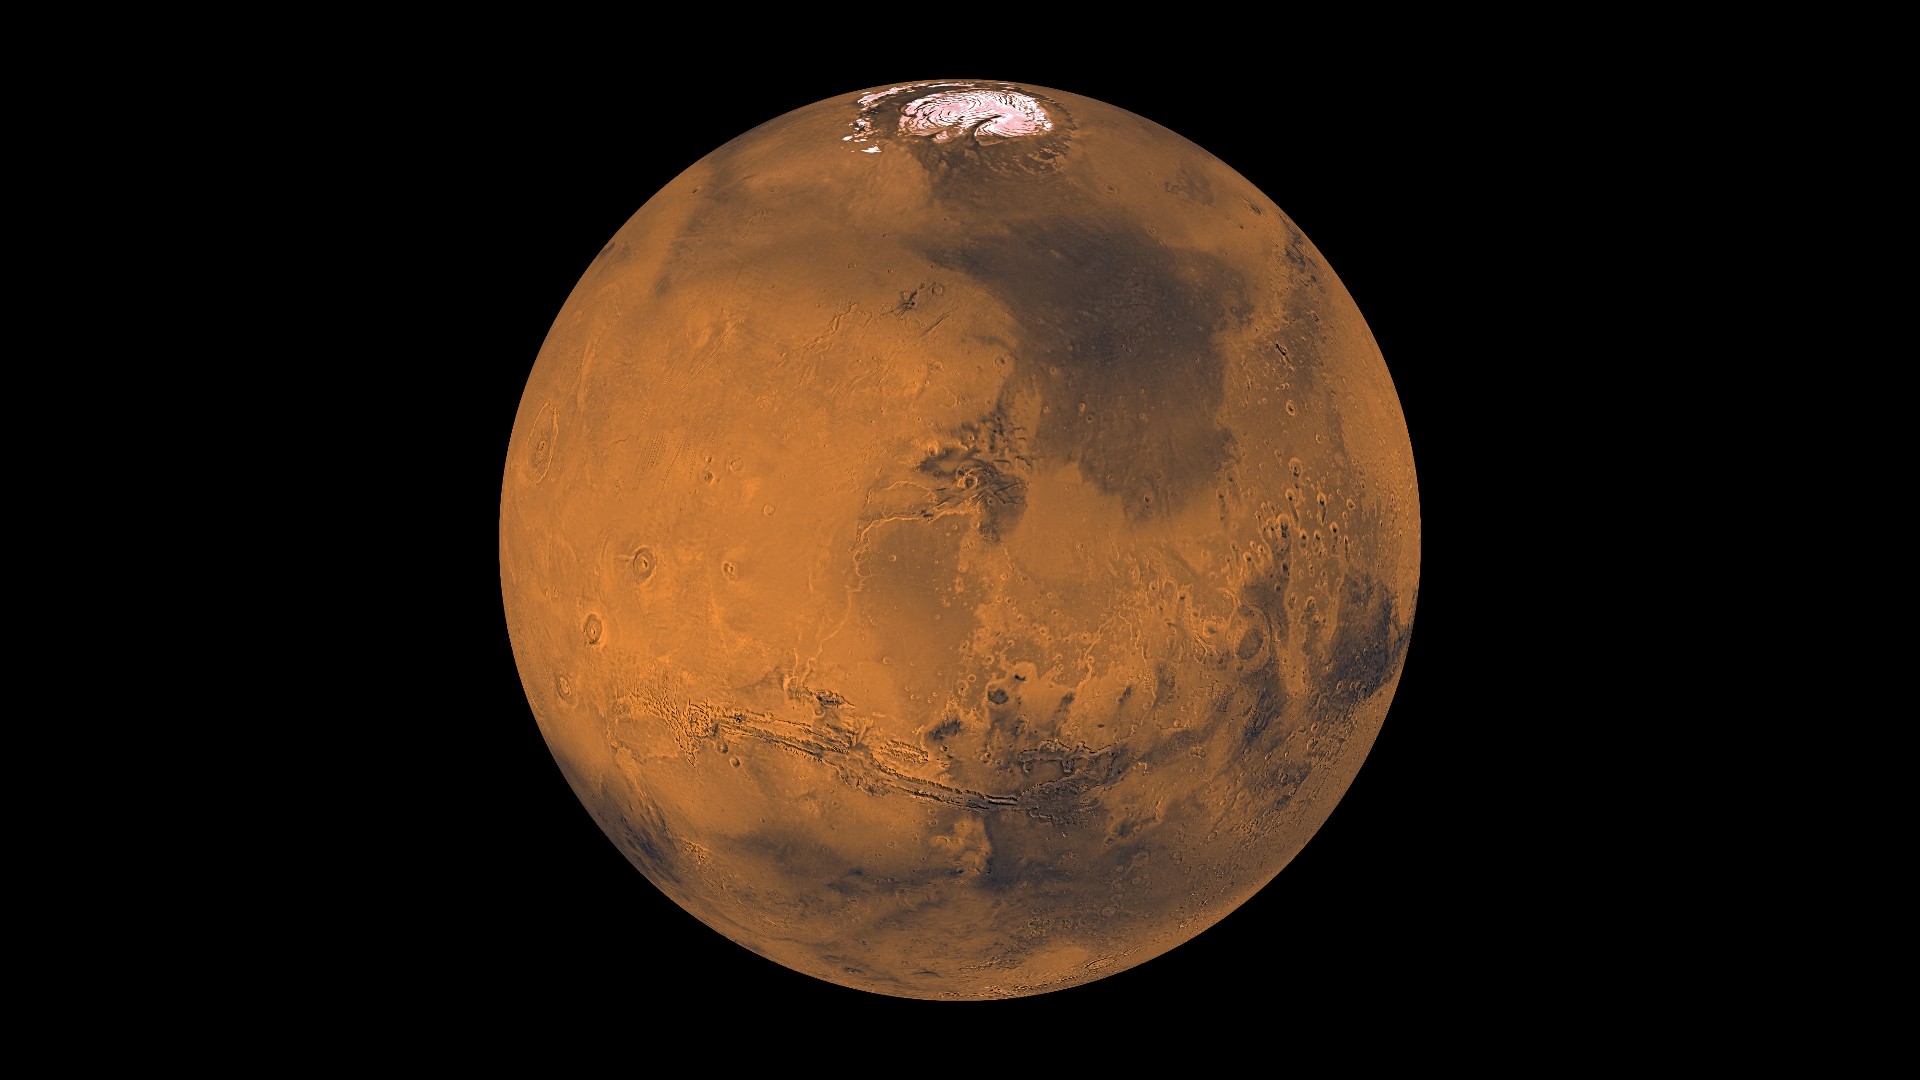 pictures of planet mars